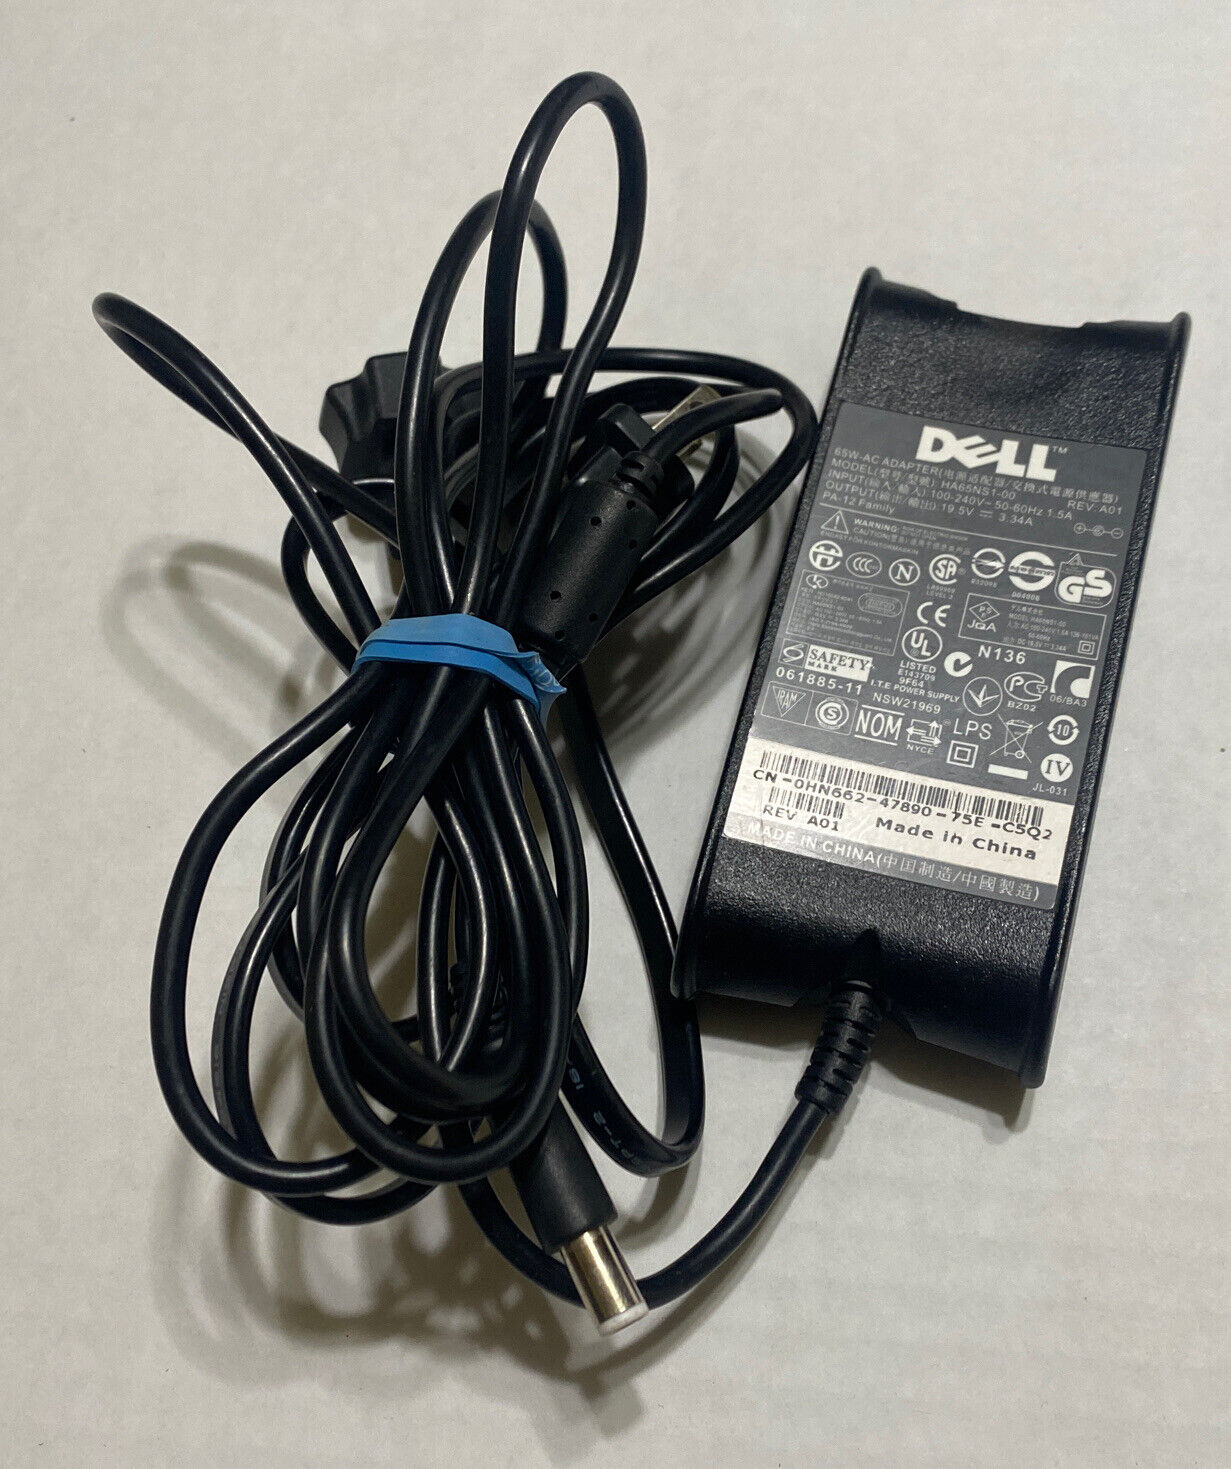 Dell HA65NS1-00 Laptop Computer Power Cord 19.5V 3.34A Tested Works